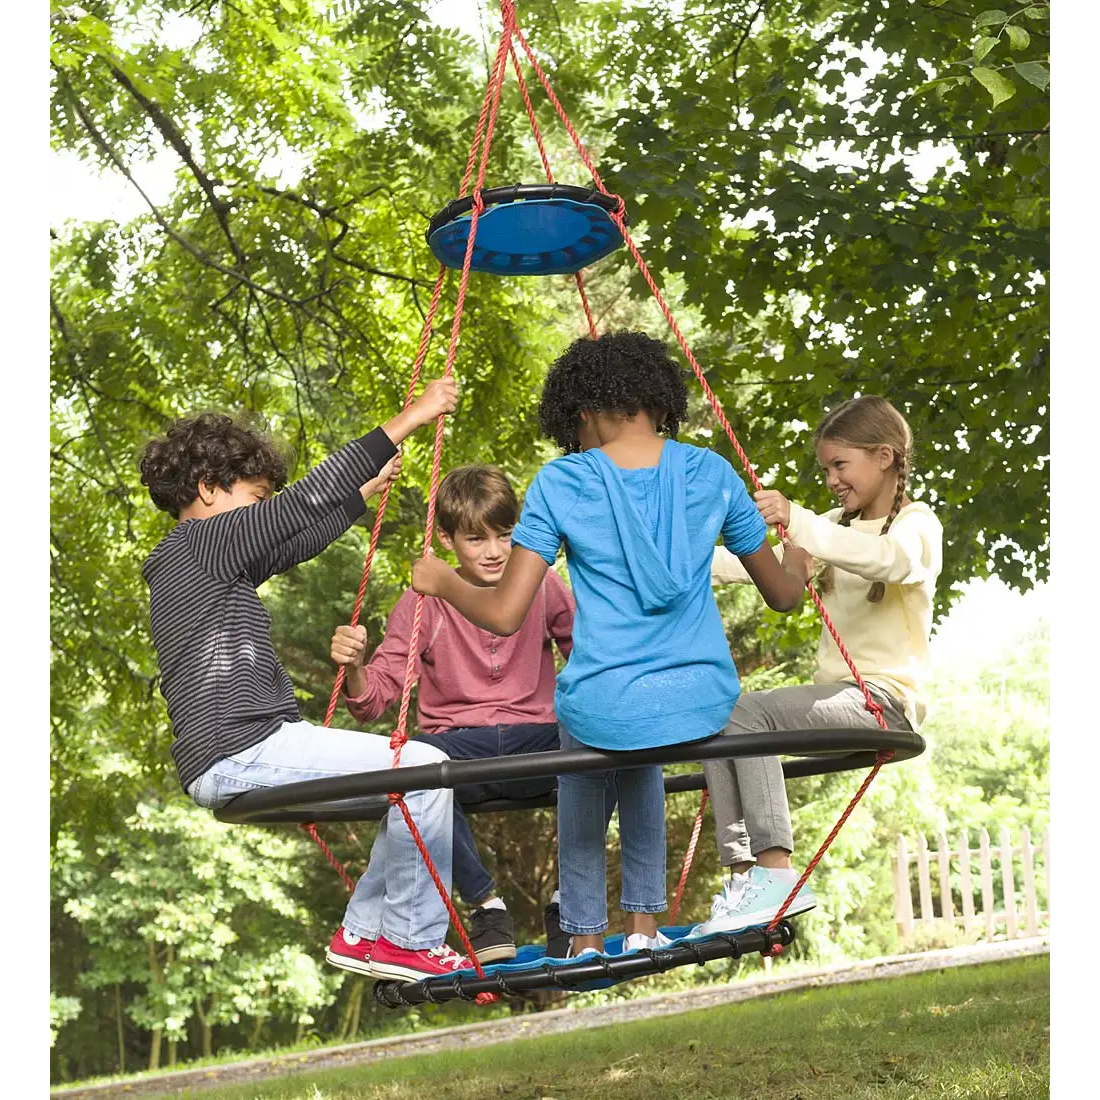 HearthSong-Large Vortex Outdoor Spinning Ring Swing-CGW730286-Legacy Toys